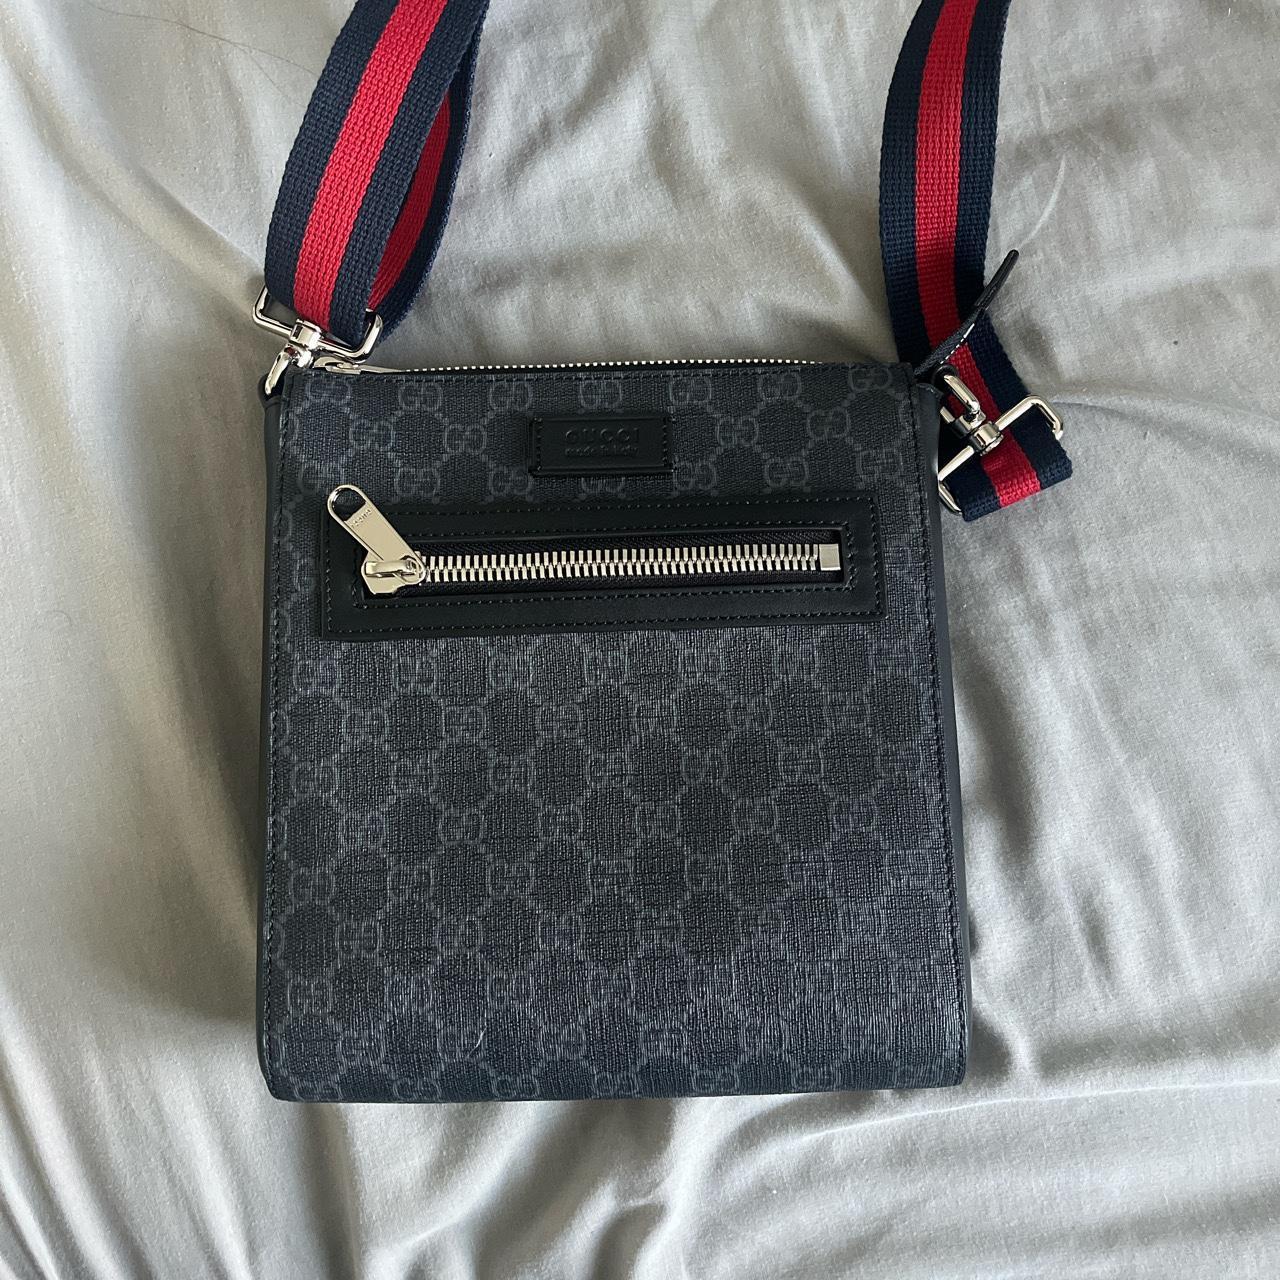 Gucci man bag Been used a few times but practically - Depop